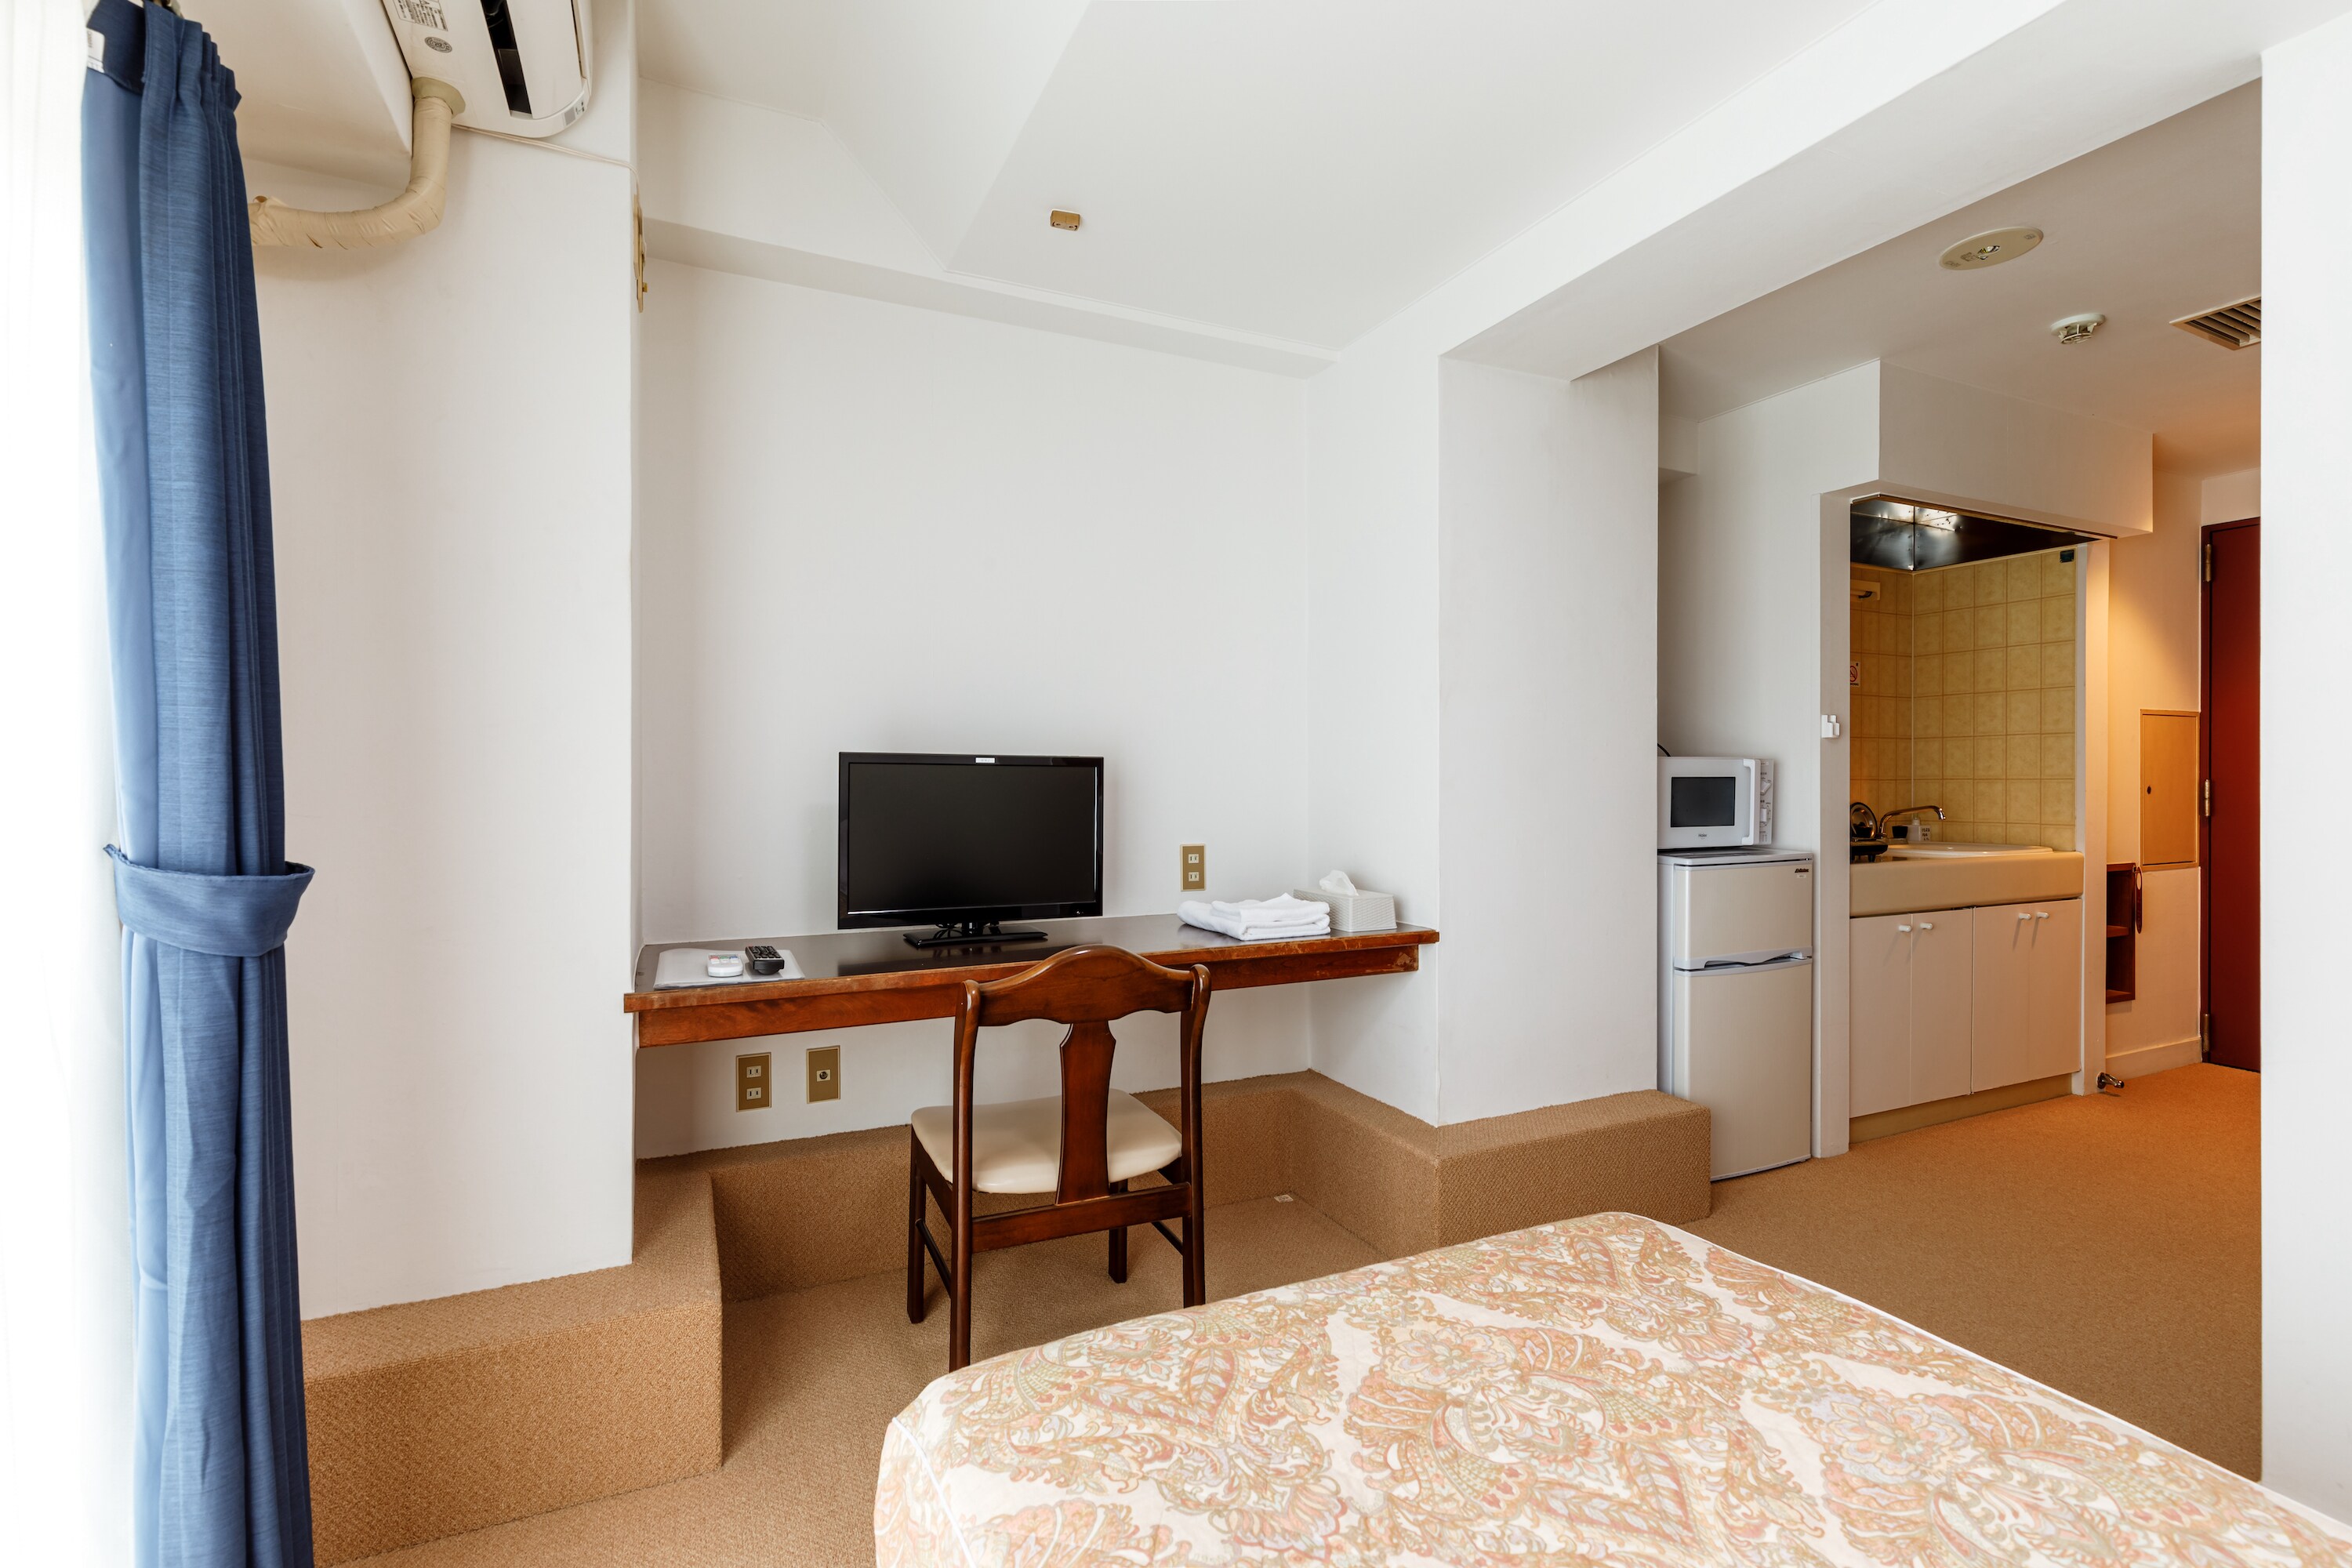 [Guest rooms] Single room / All rooms are equipped with IH stove, microwave oven and refrigerator.